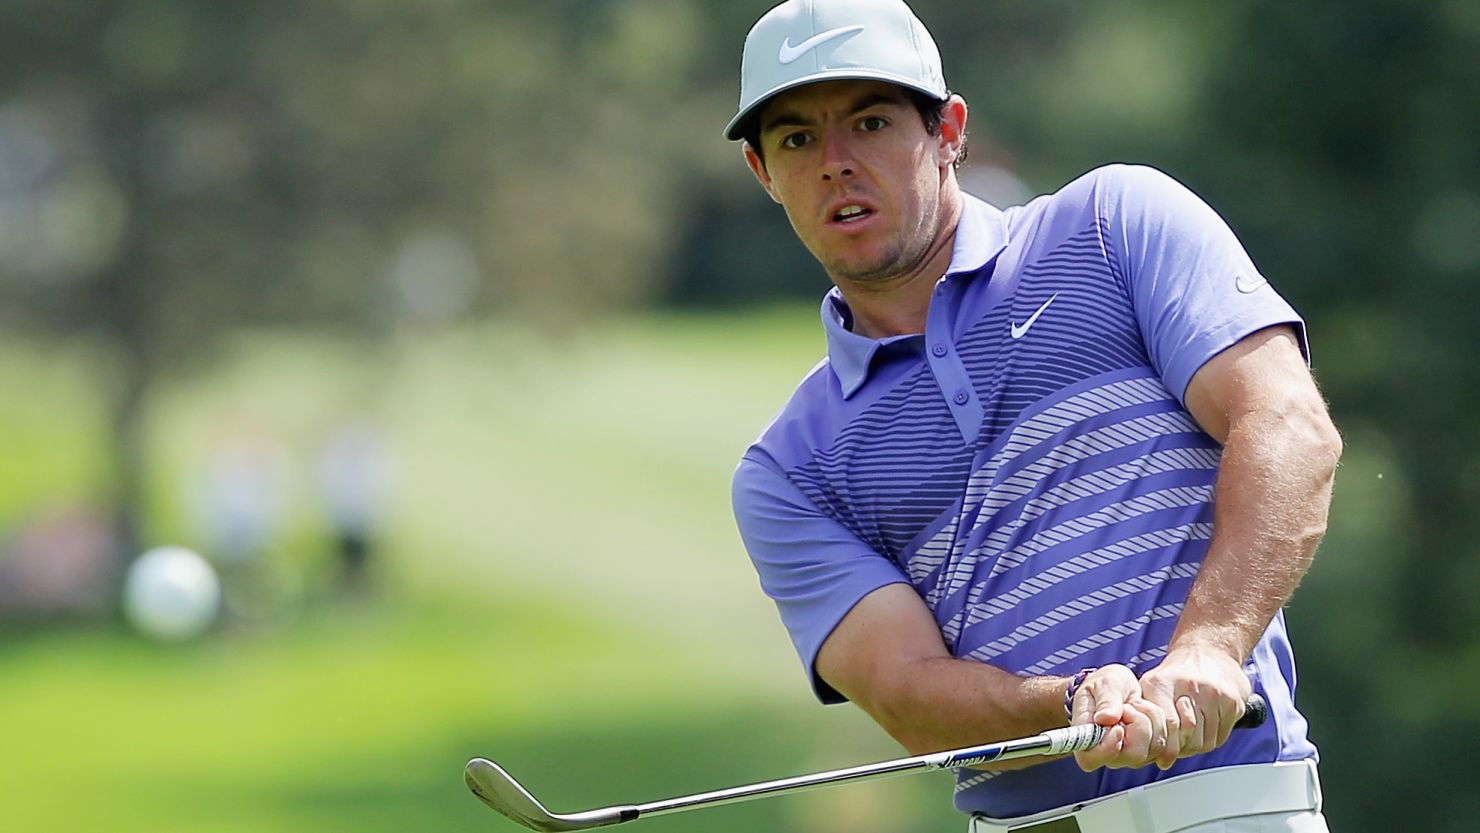 Northern Ireland's Rory McIlroy is tied for the lead at the BMW Championship in Colorado.